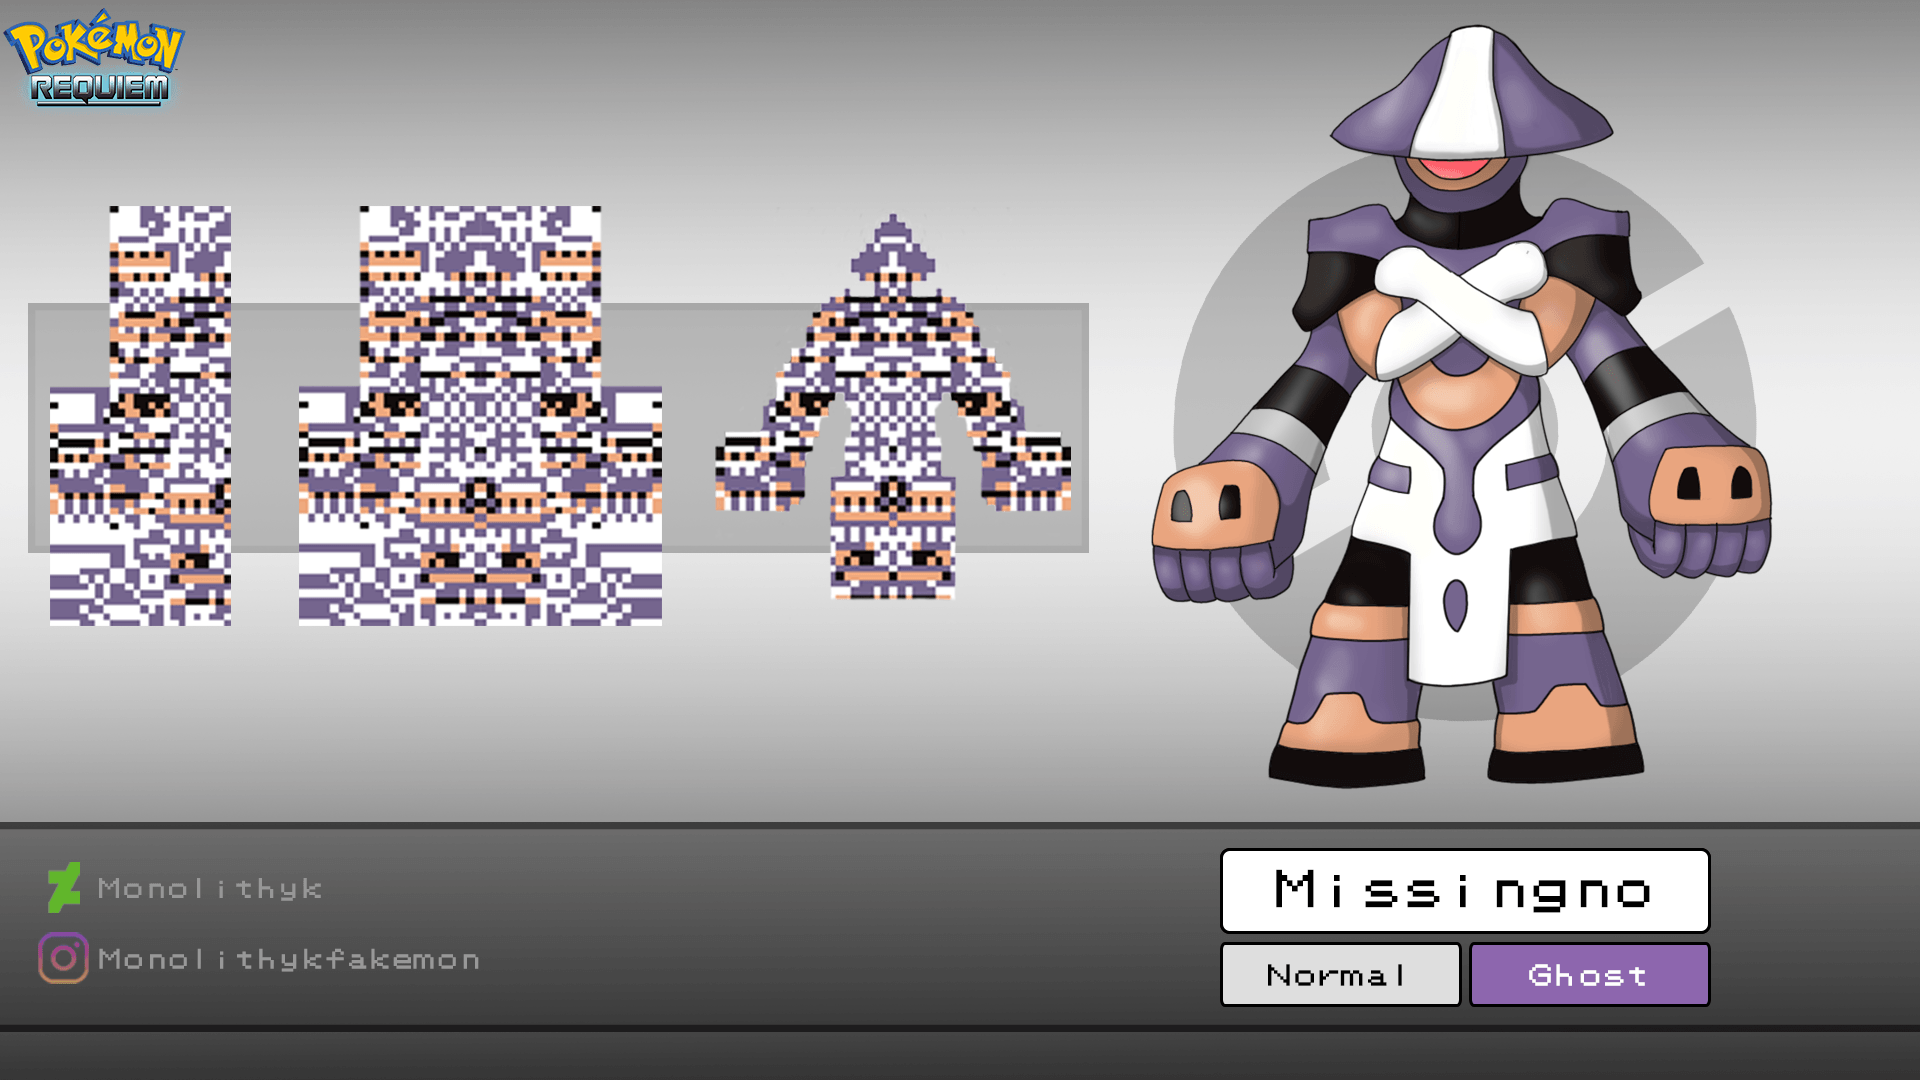 Here's a fun little take I did on Missingno